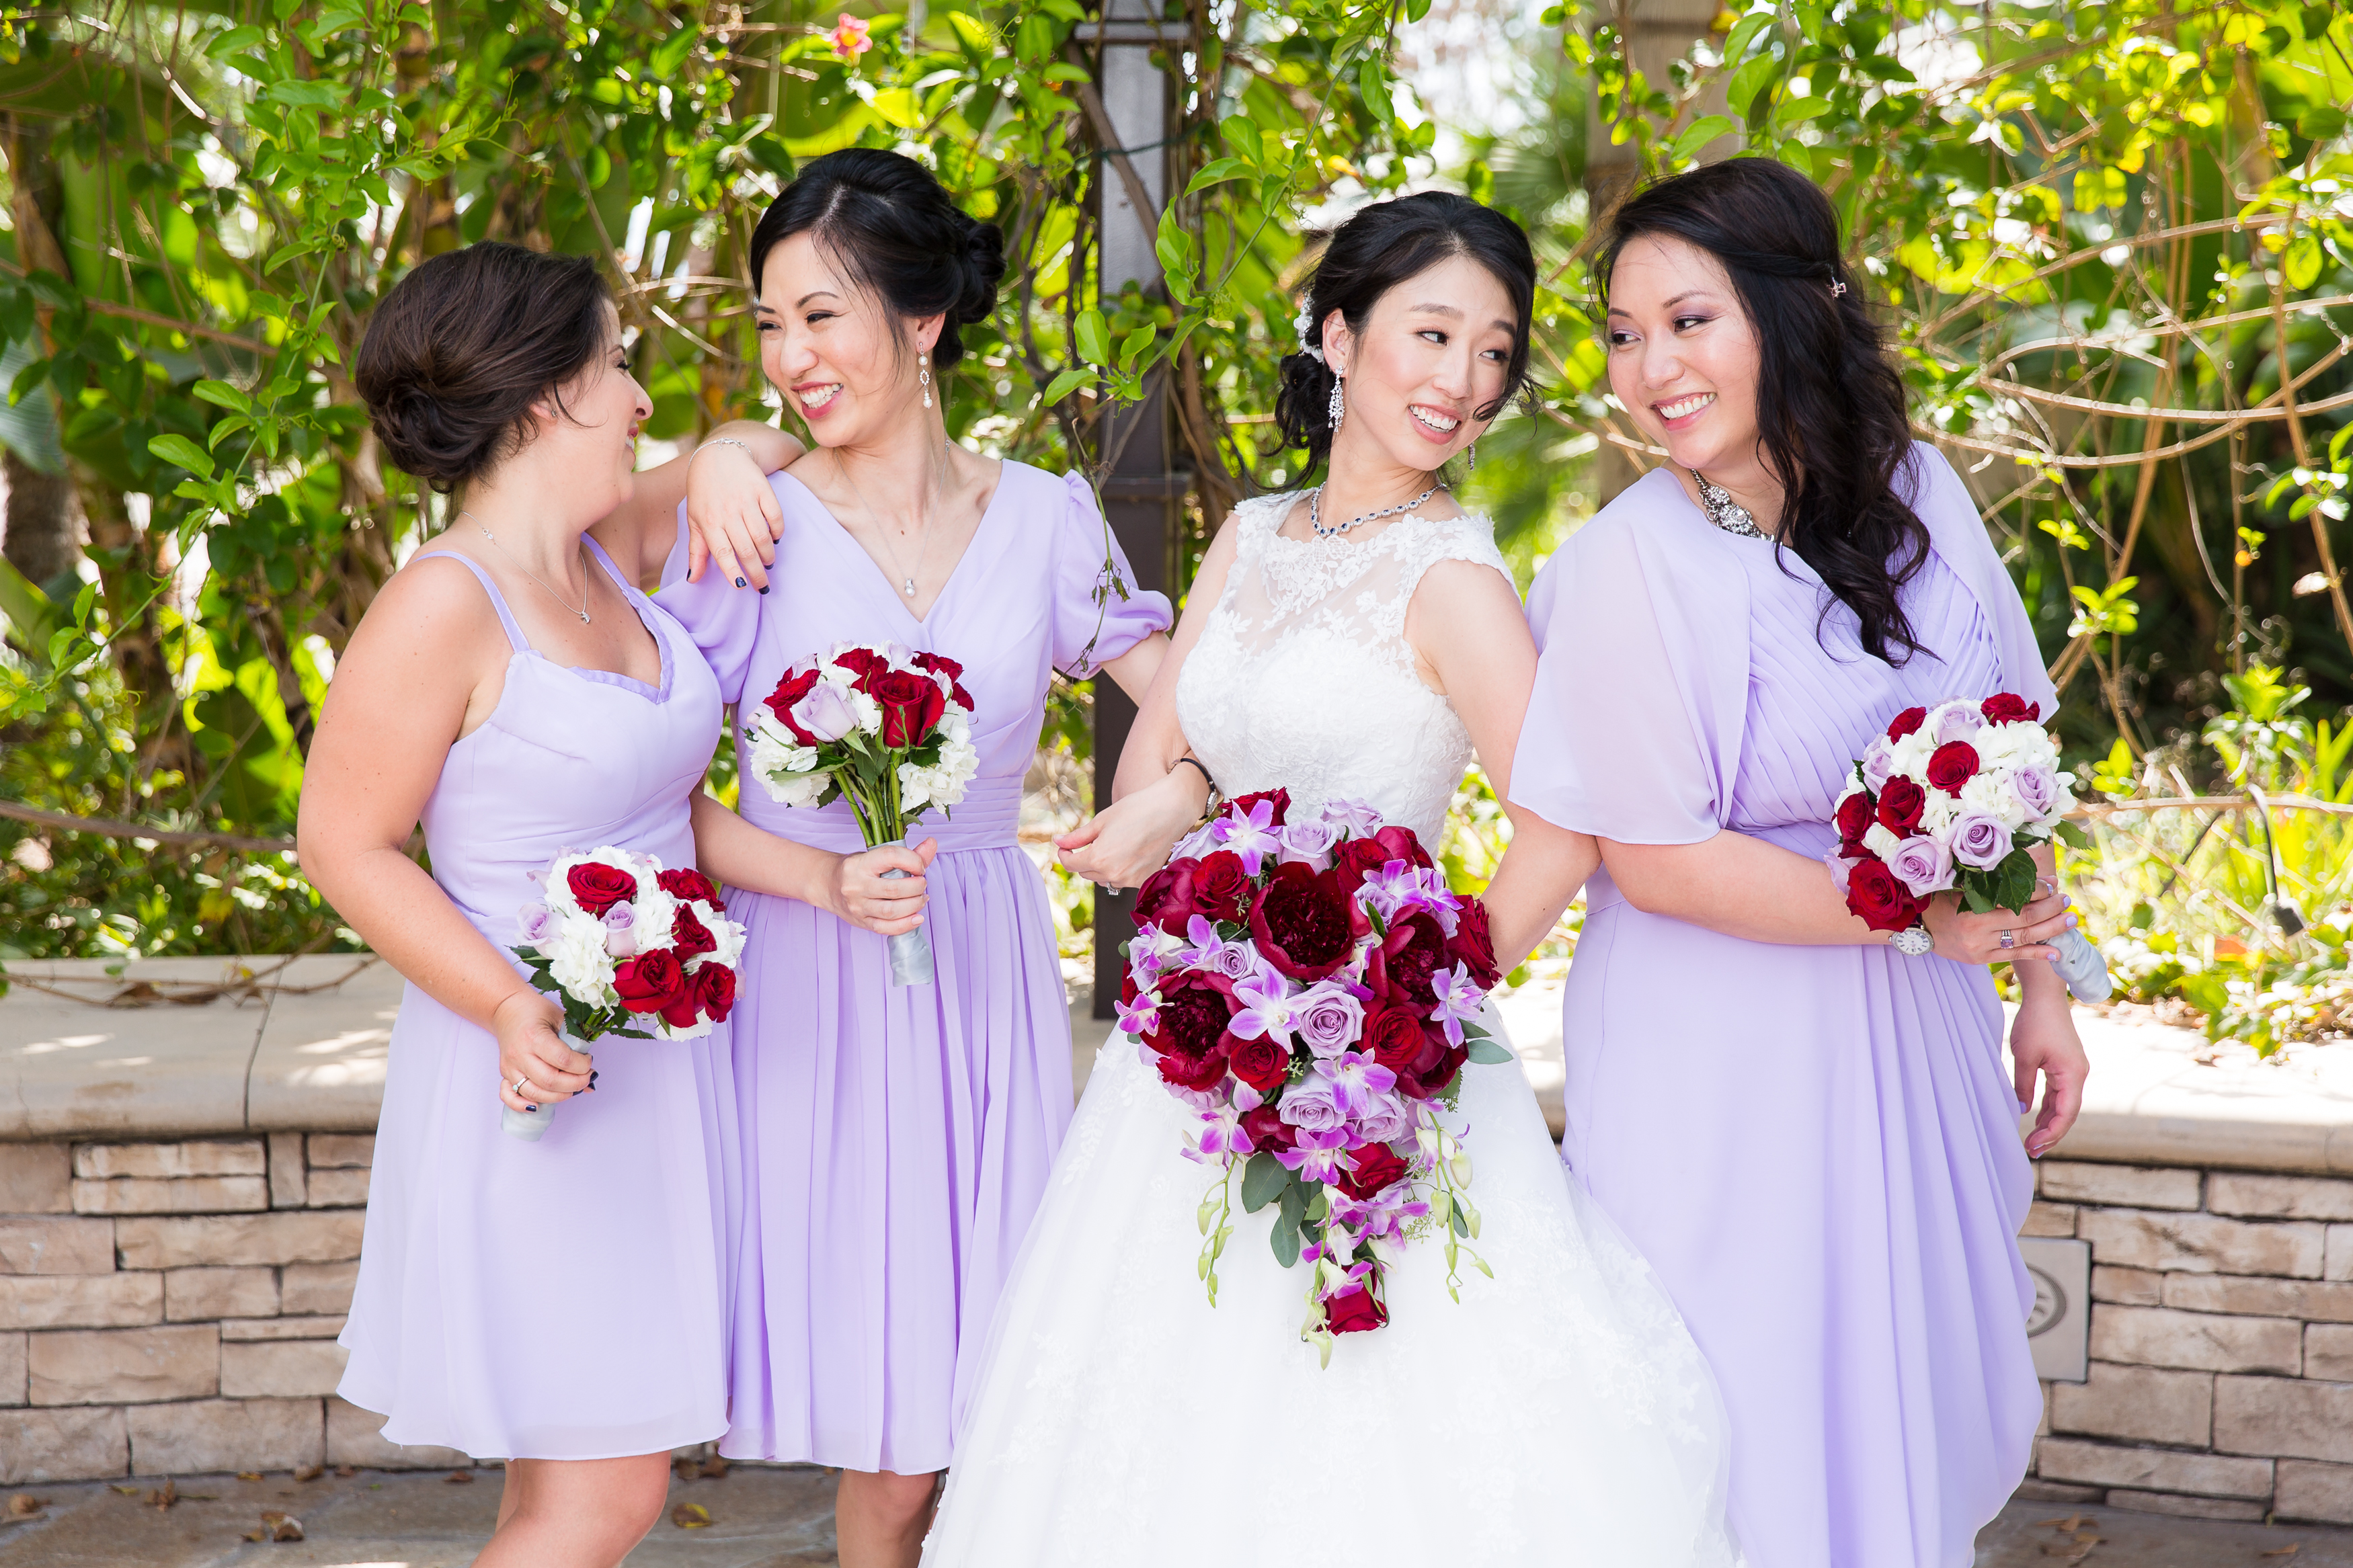 Photo of bride with bridesmaids by Stefani Ciotti in City of Industry